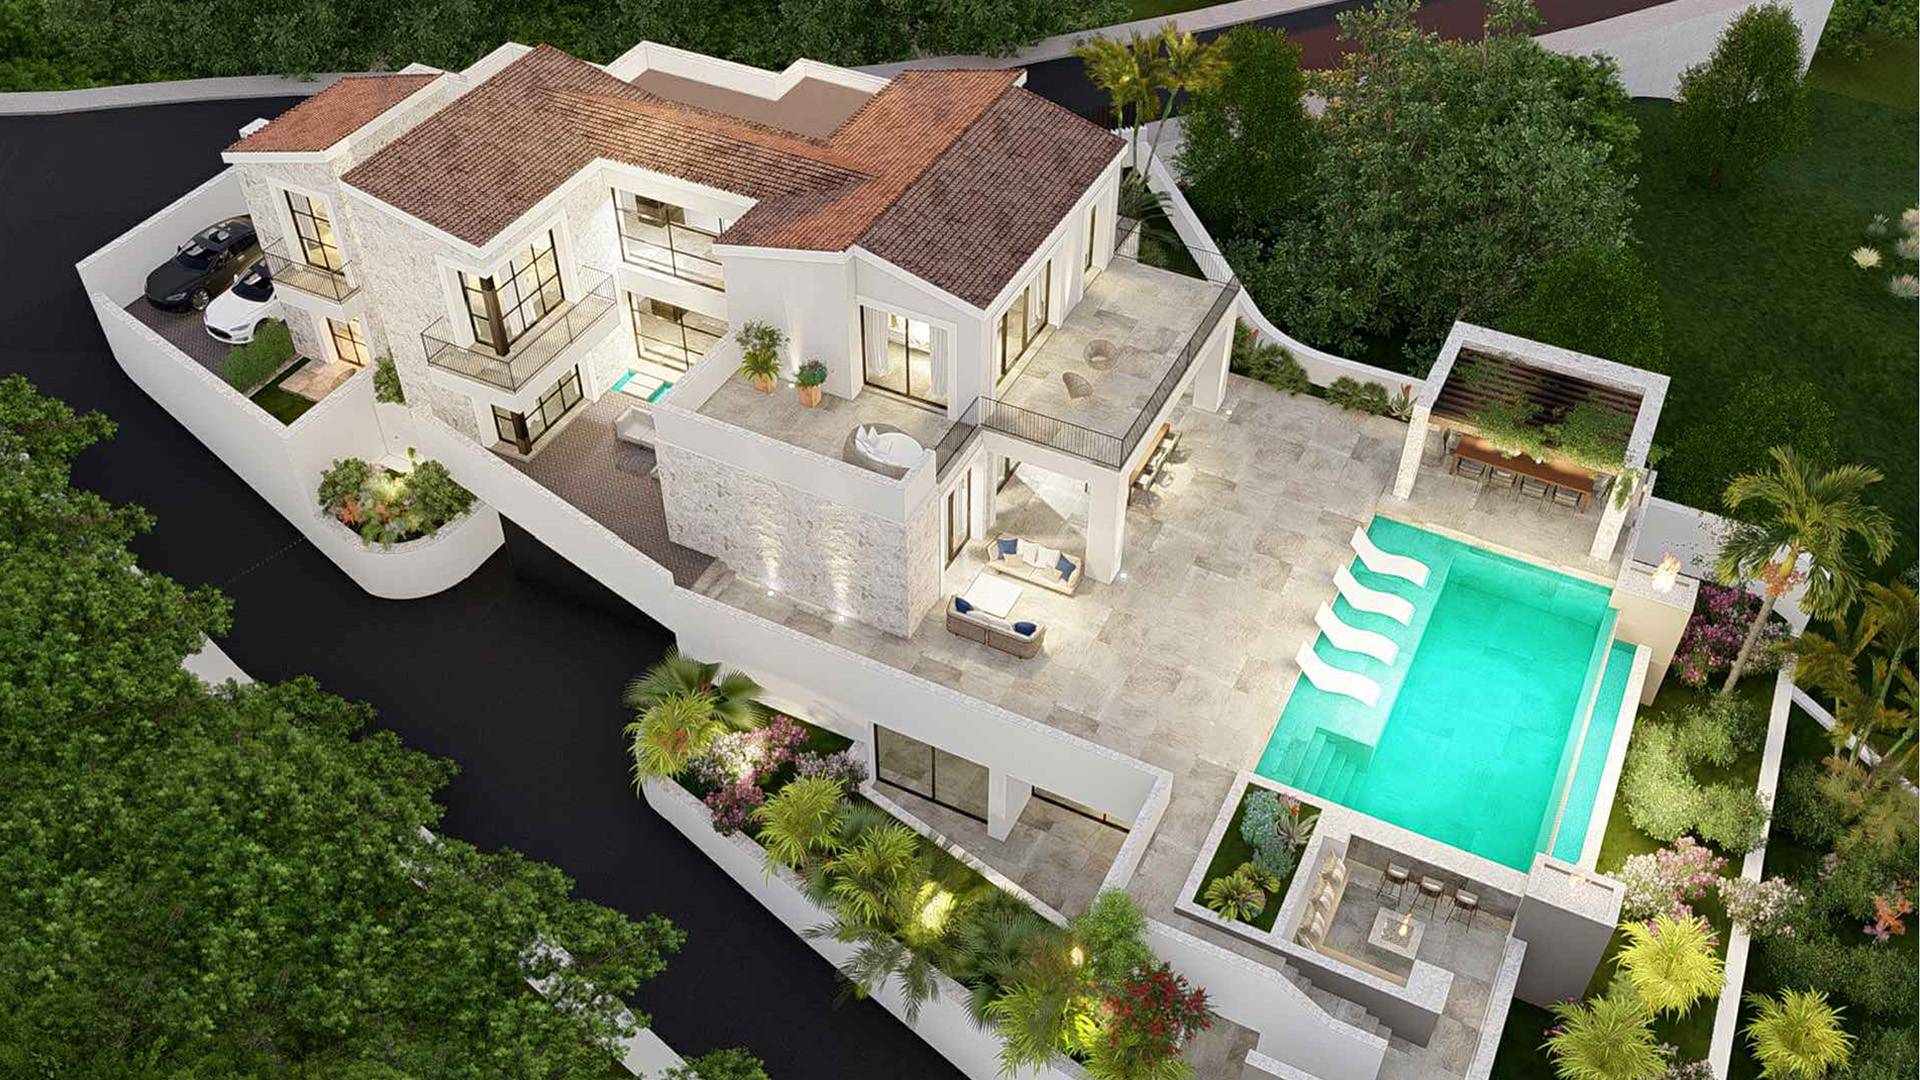 Spanish Corner - Villa 16: Near to completion, this stunning estate is situated on a luxurious plot within the exclusive gated community of The Hills in La Quinta